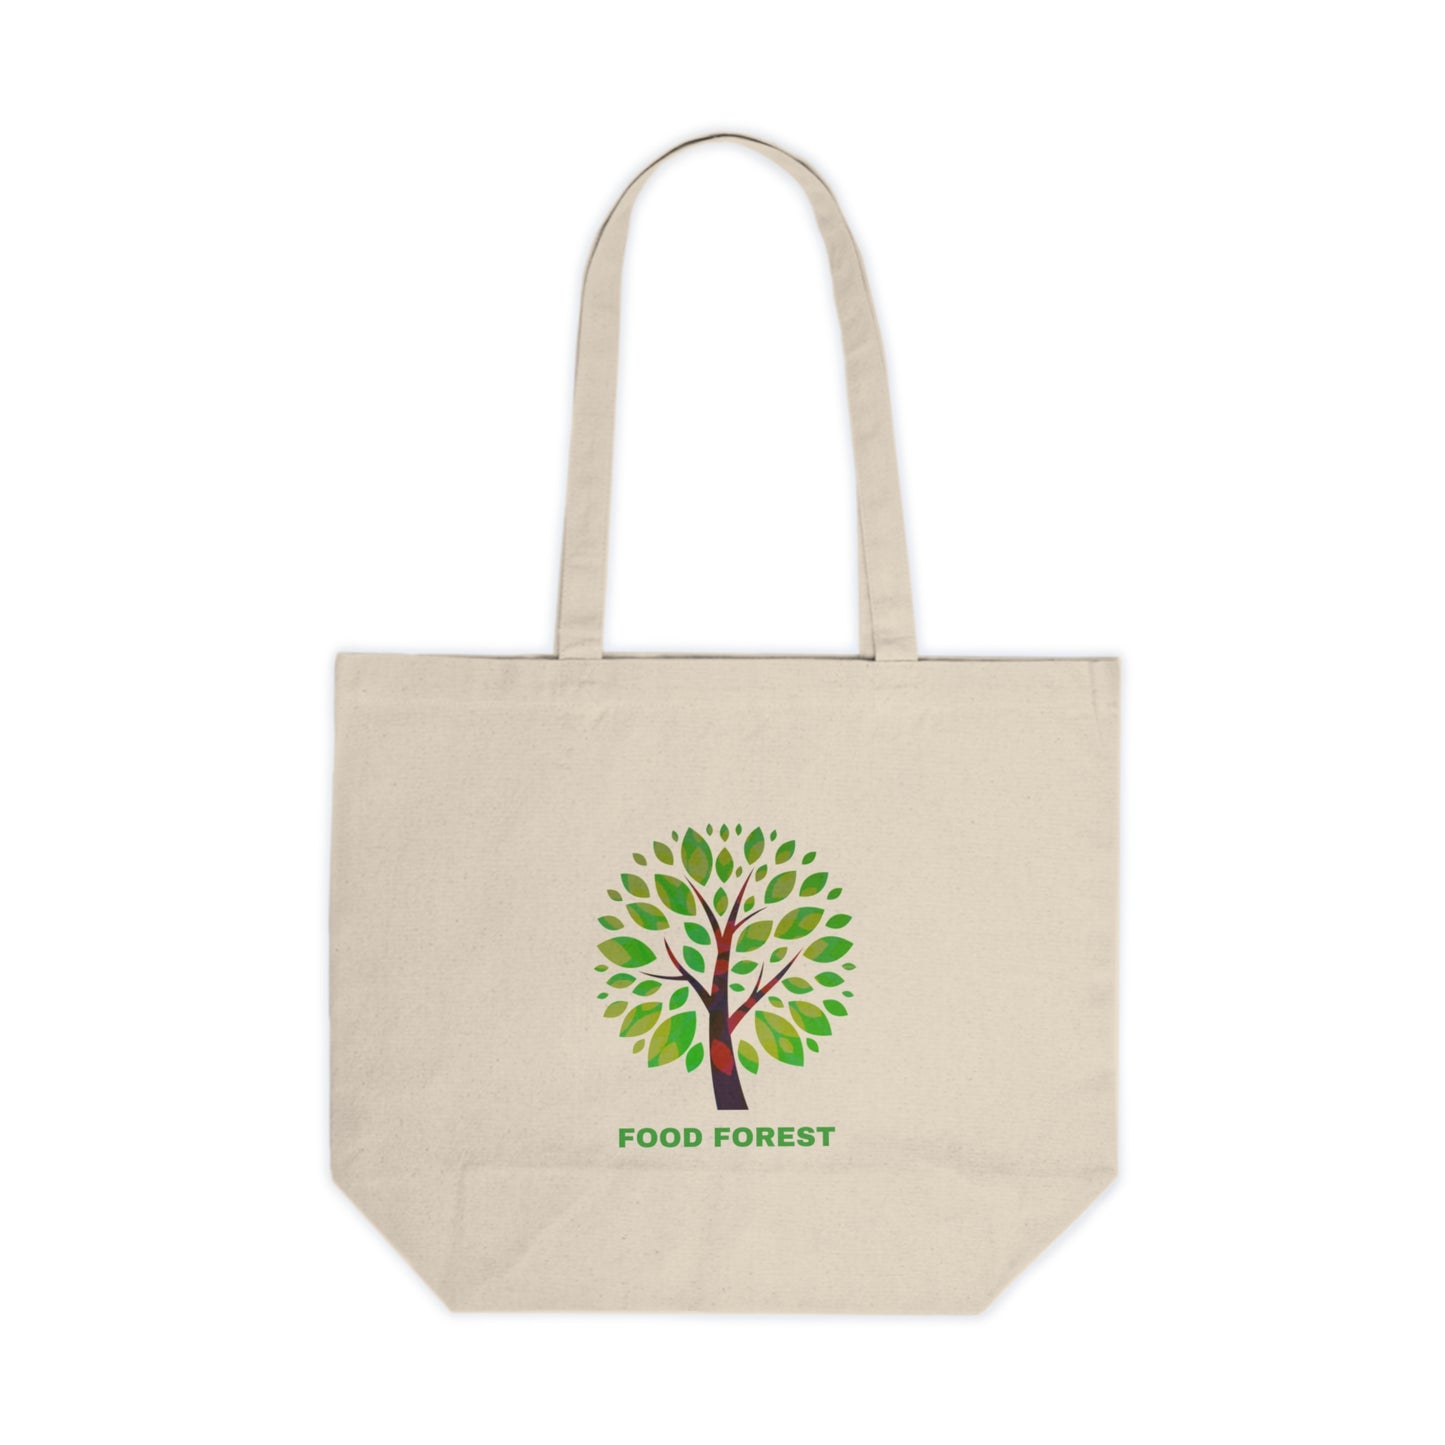 FOOD FOREST Canvas Shopping Tote